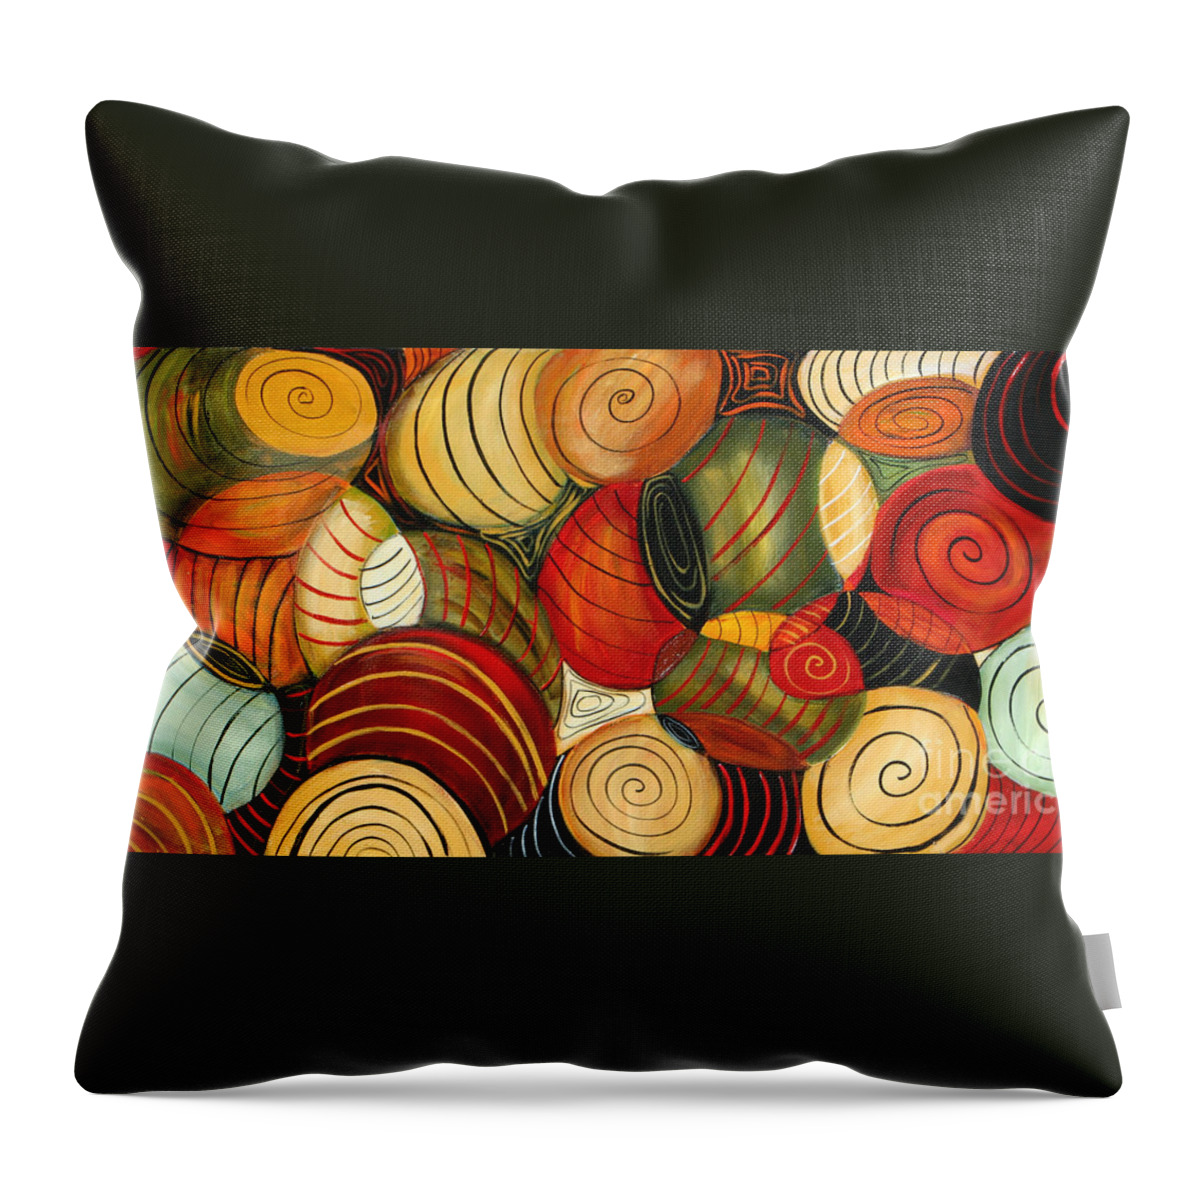 Happy Throw Pillow featuring the painting Shells by Lauren Marems